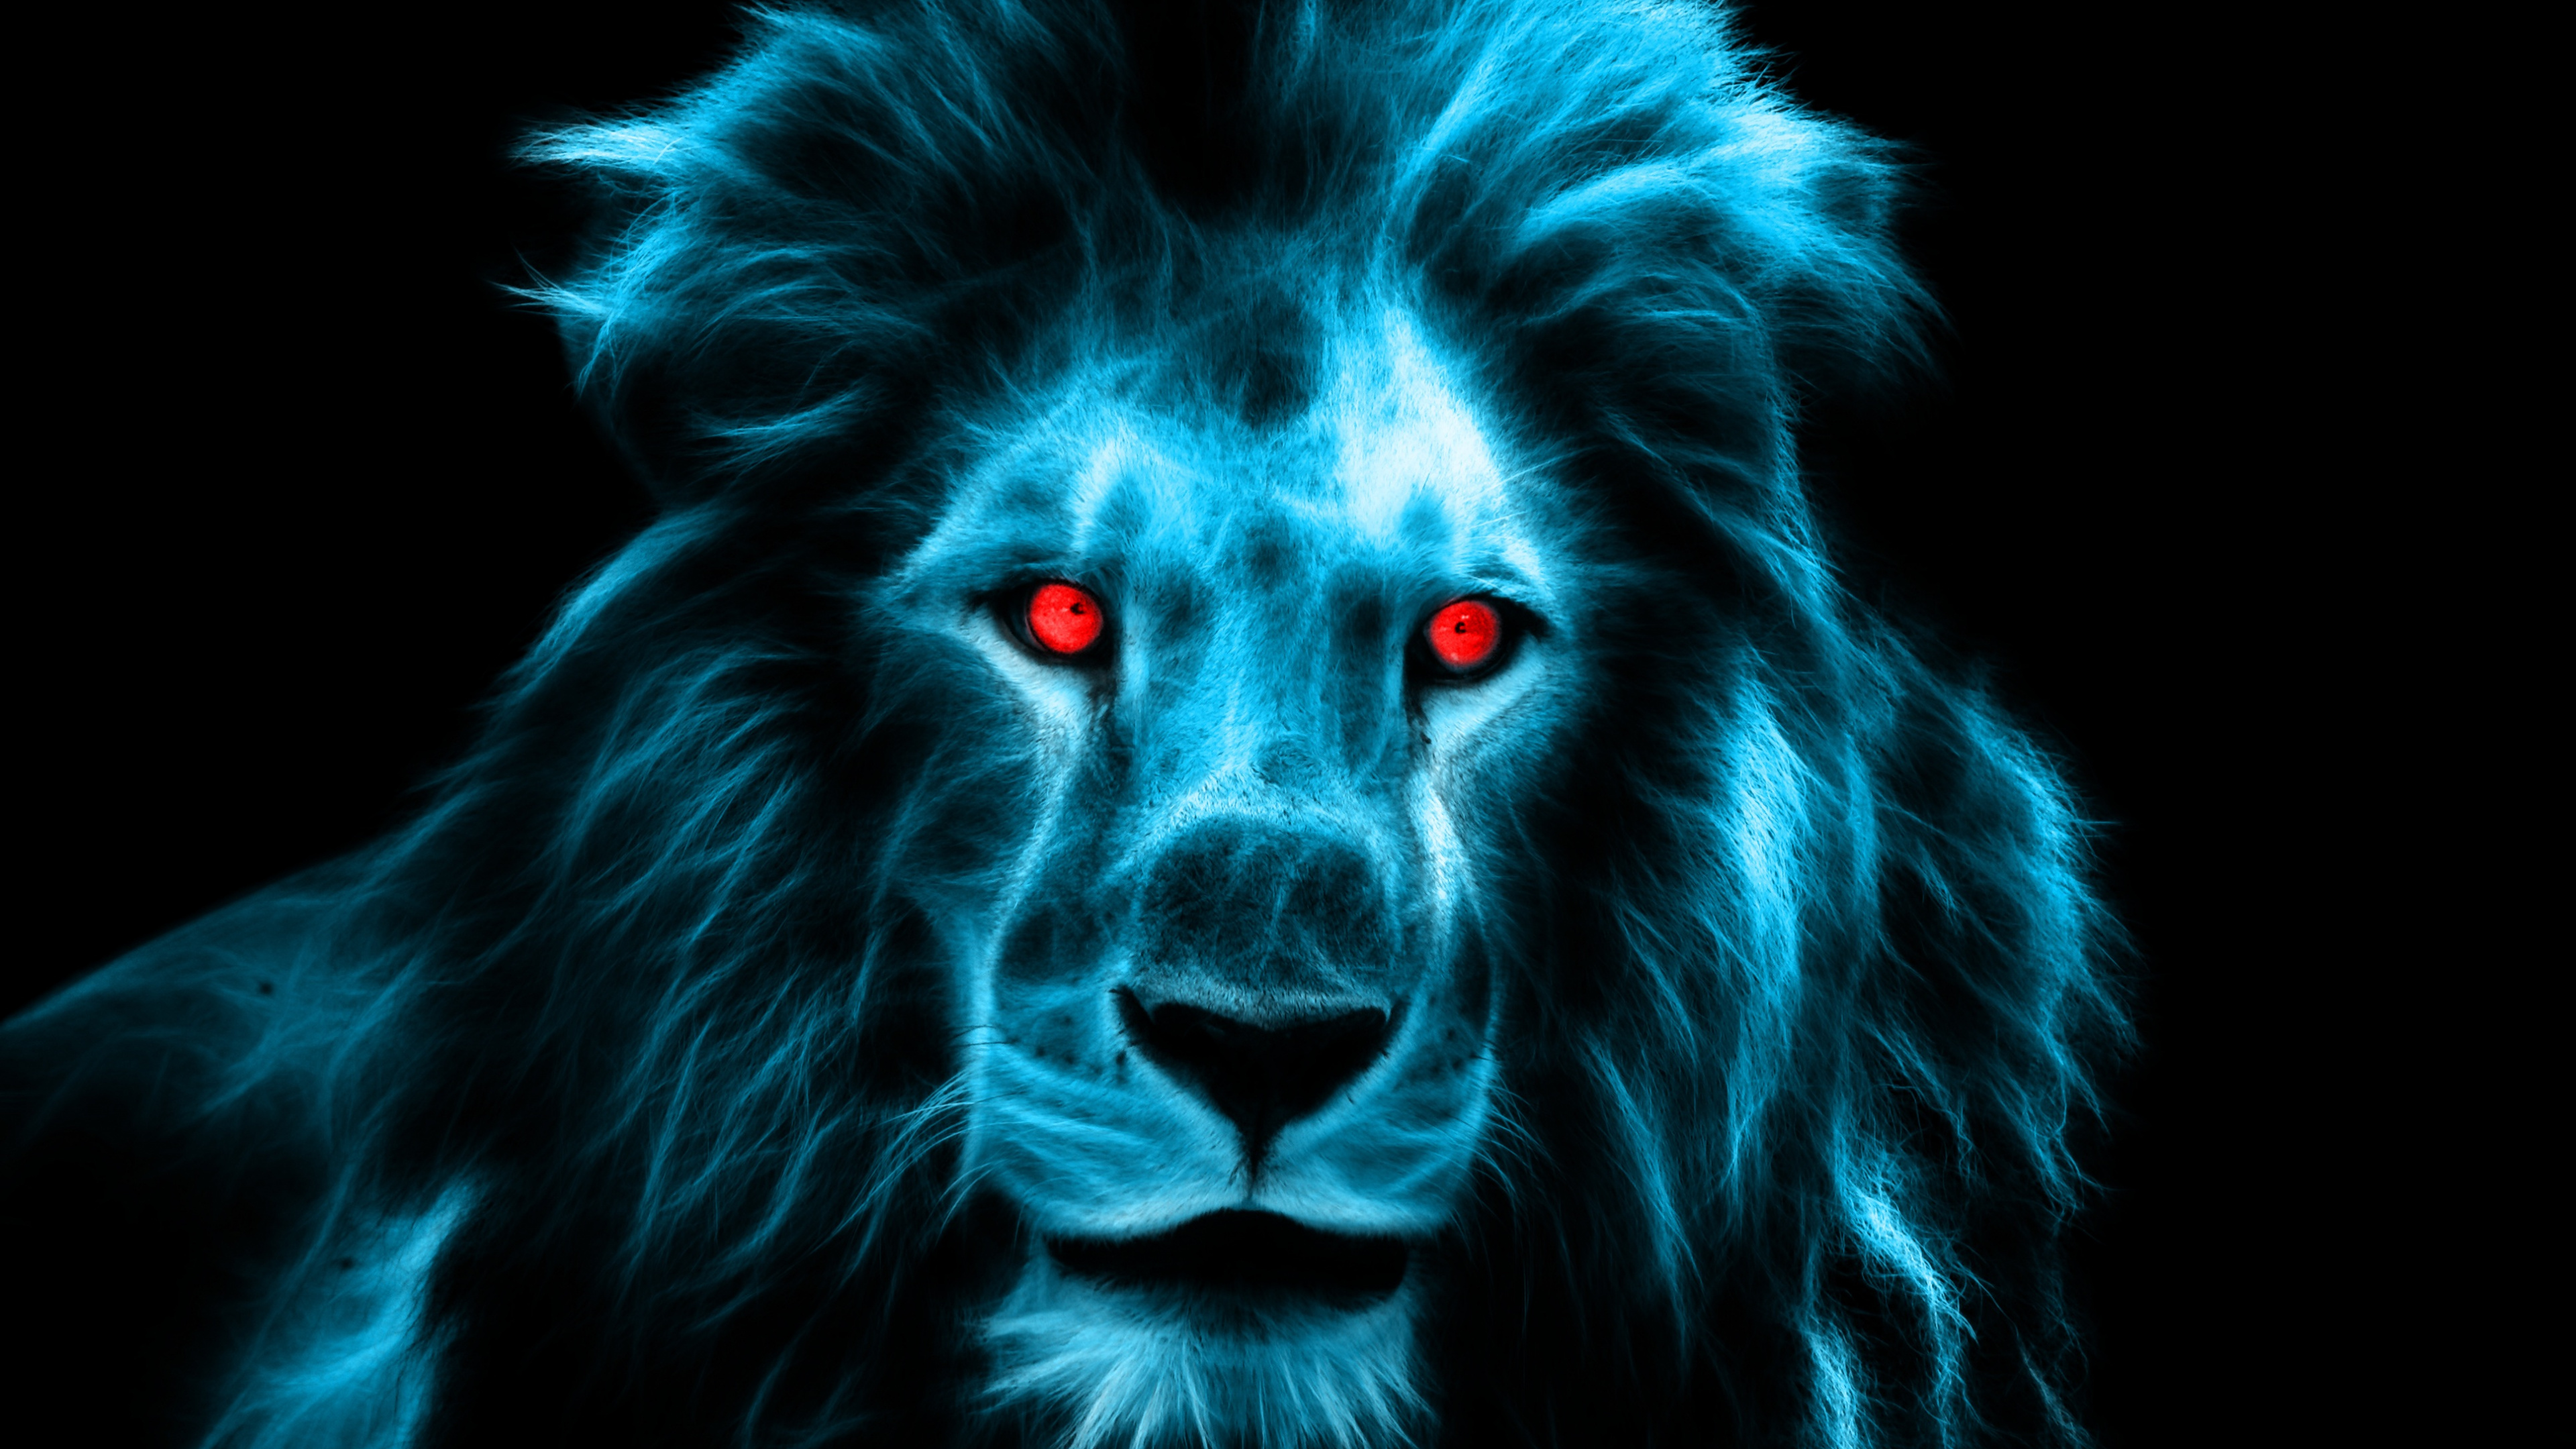 Lion With Blue Eyes Illustration. Wallpaper in 3840x2160 Resolution